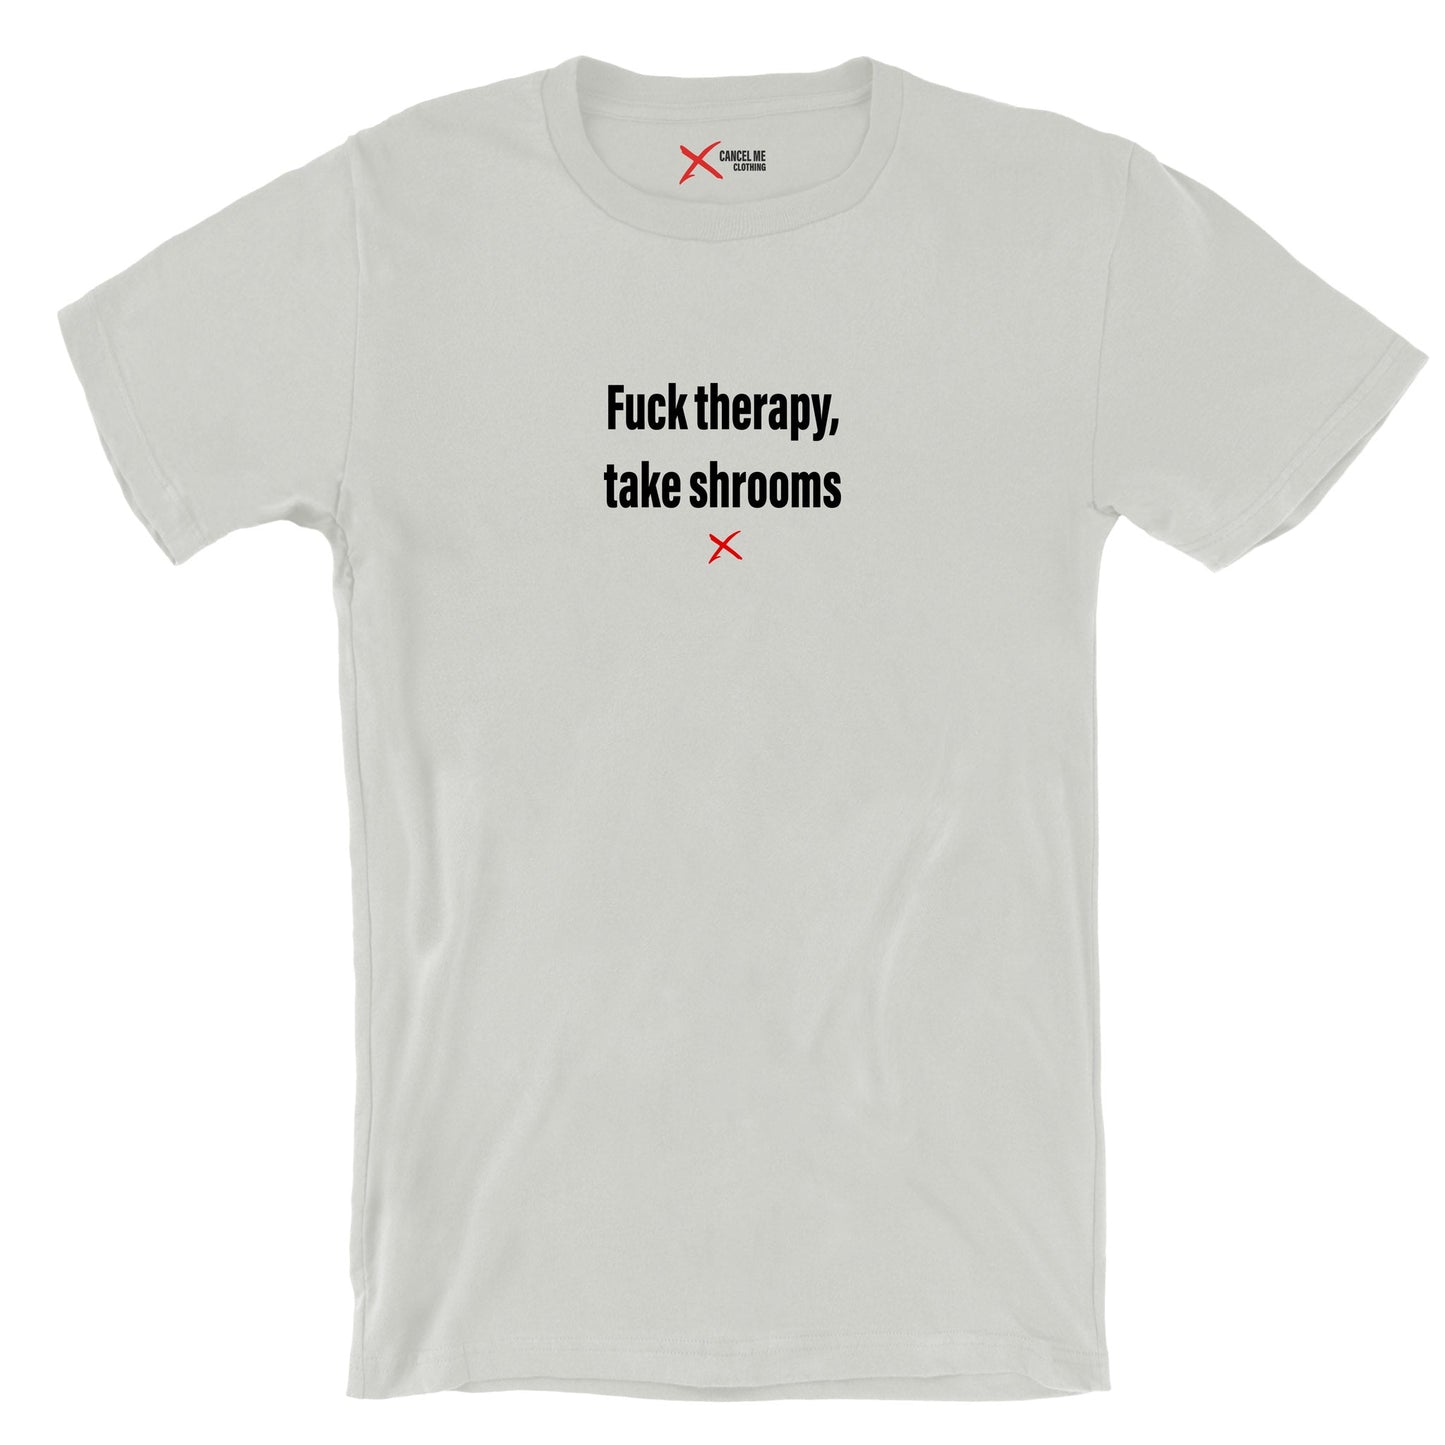 Fuck therapy, take shrooms - Shirt